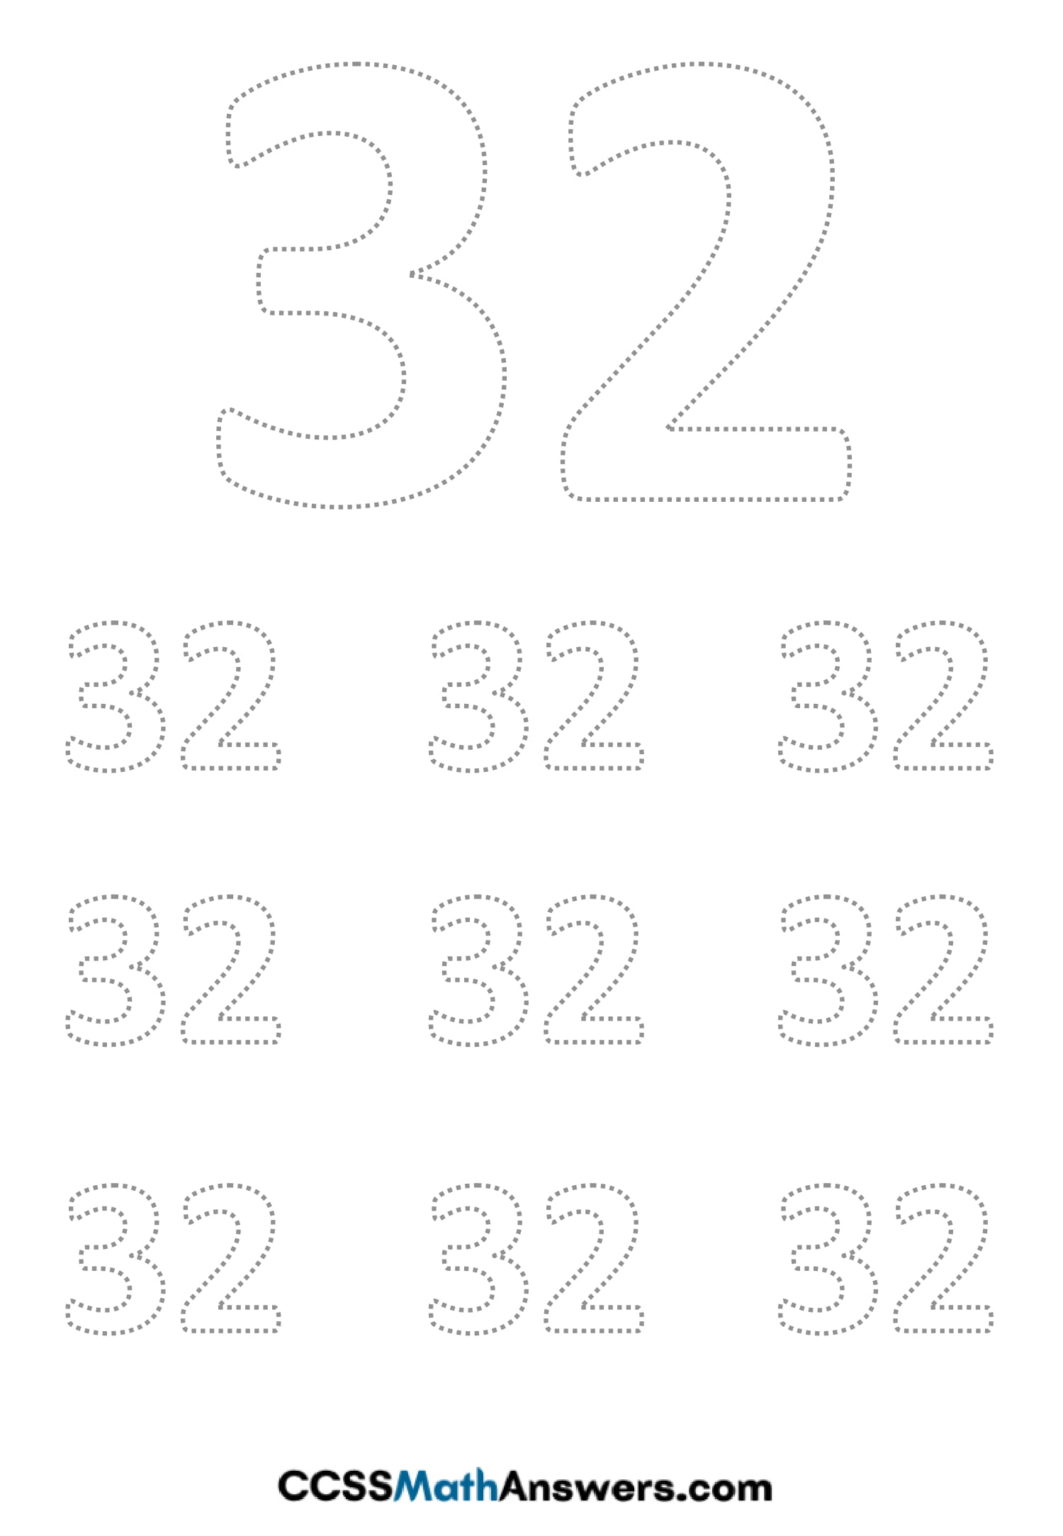 Worksheet On Number 32 Number 32 Tracing Counting Identification Activities For Kindergarten